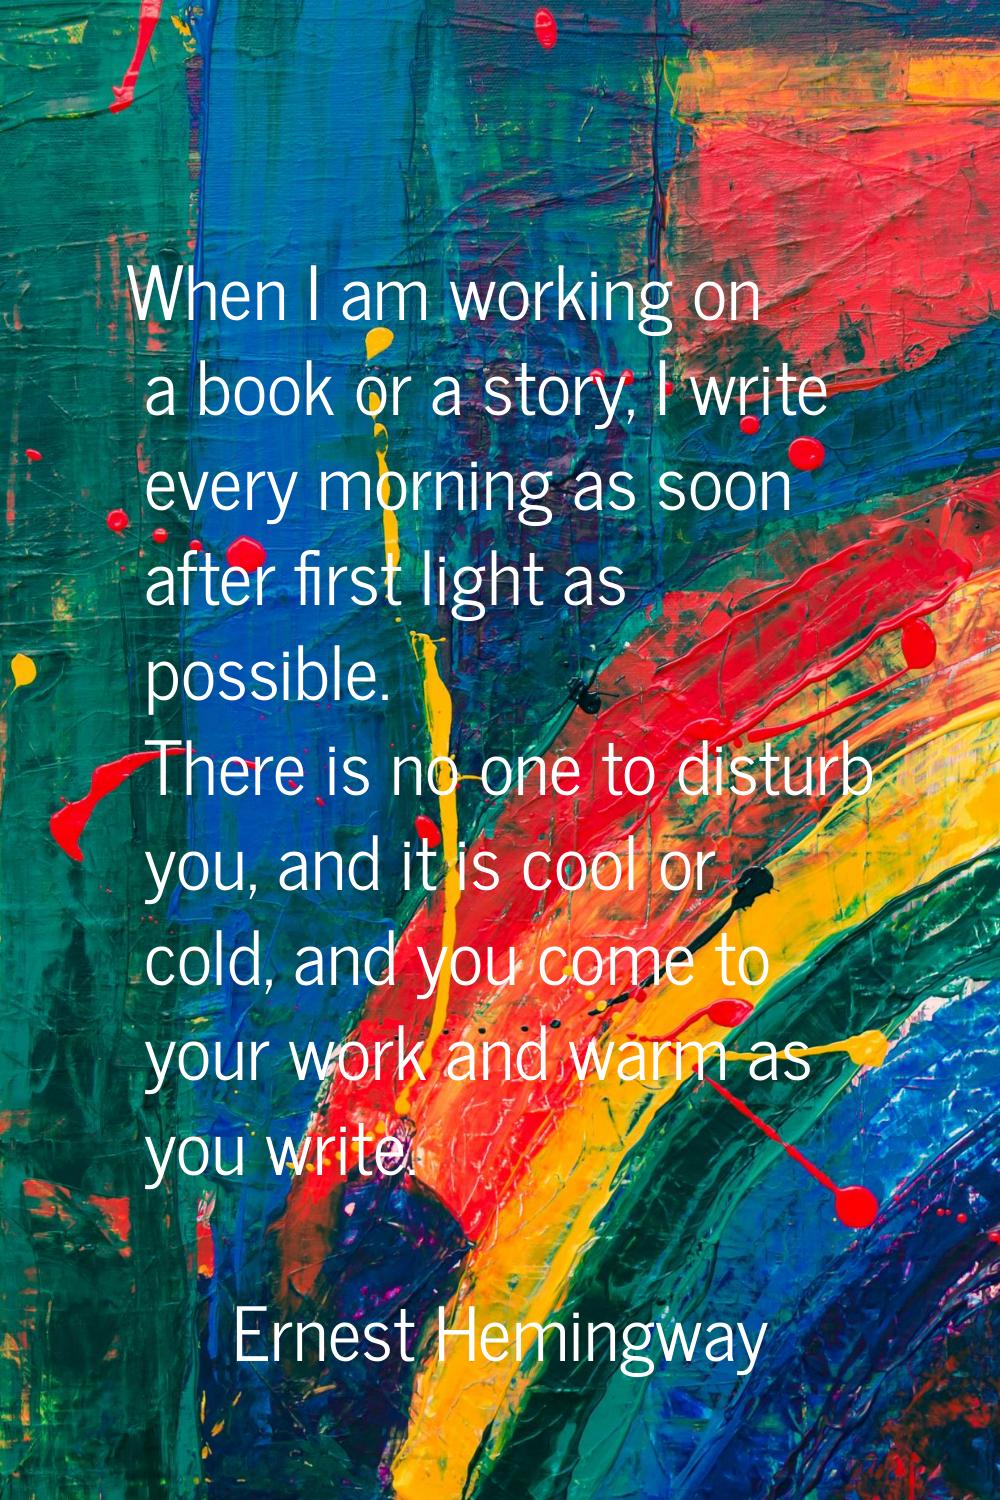 When I am working on a book or a story, I write every morning as soon after first light as possible